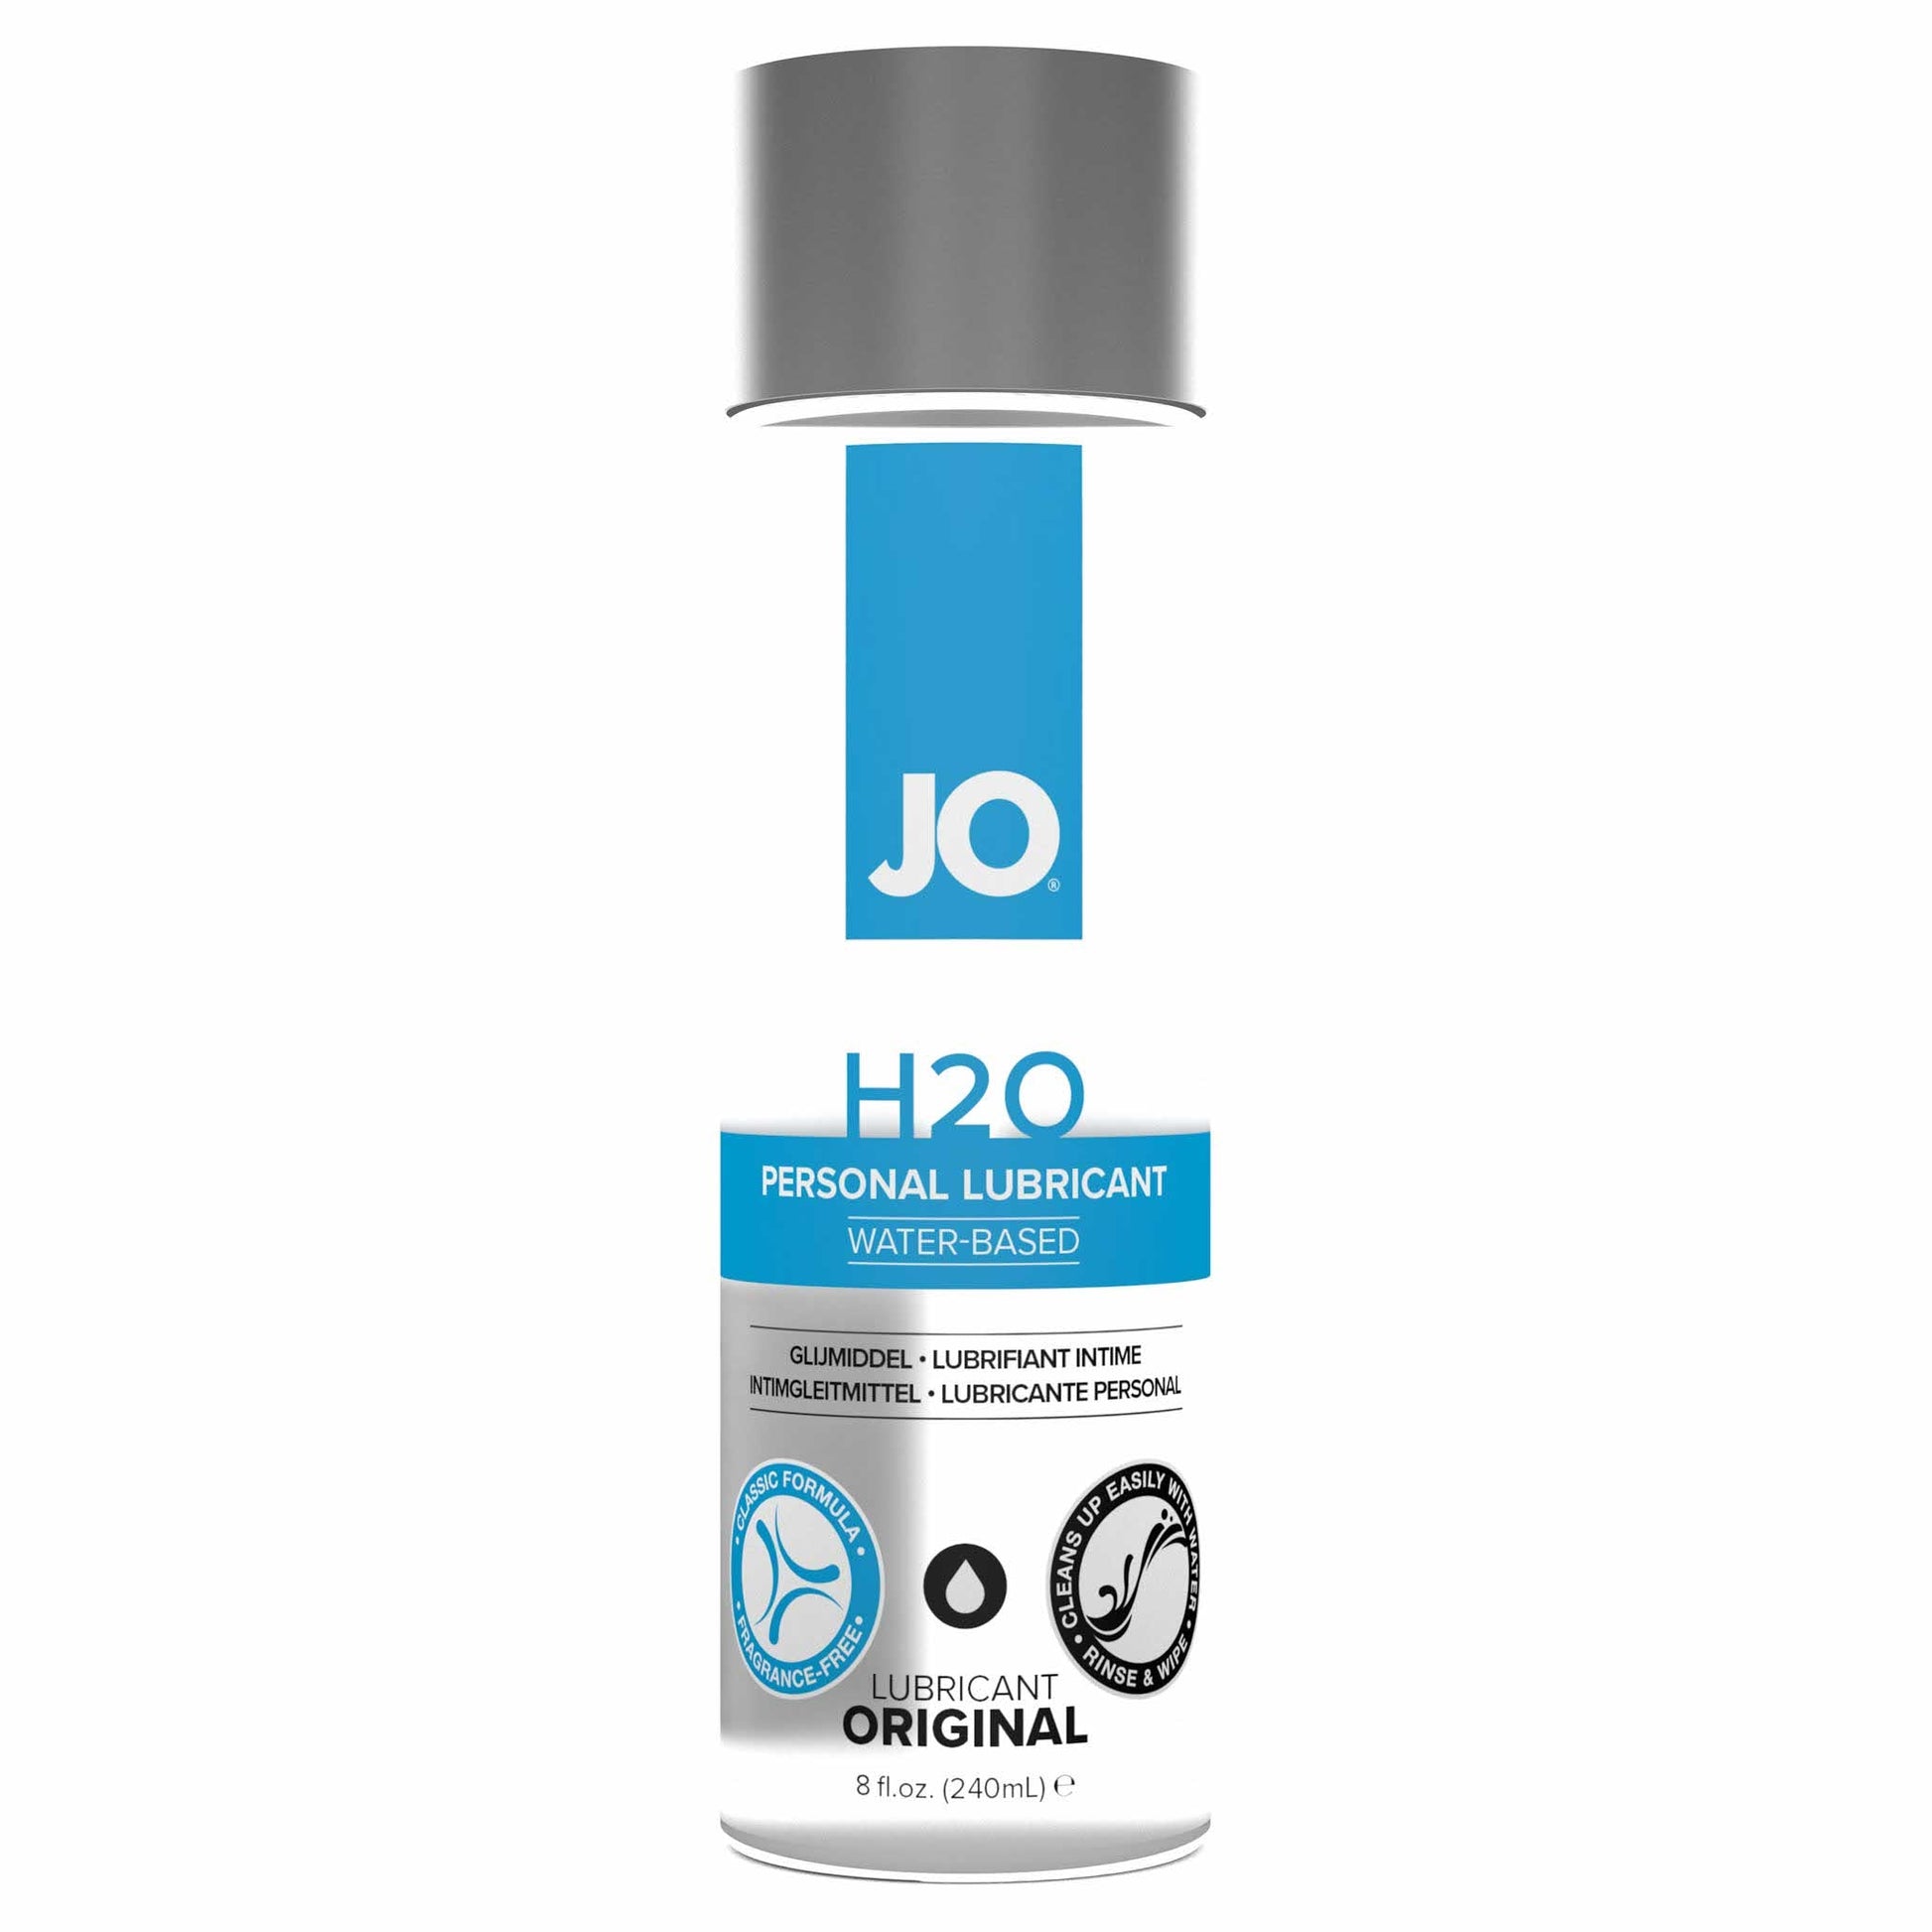 front view of the jo h2o classic personal water-based lubricant original 8oz